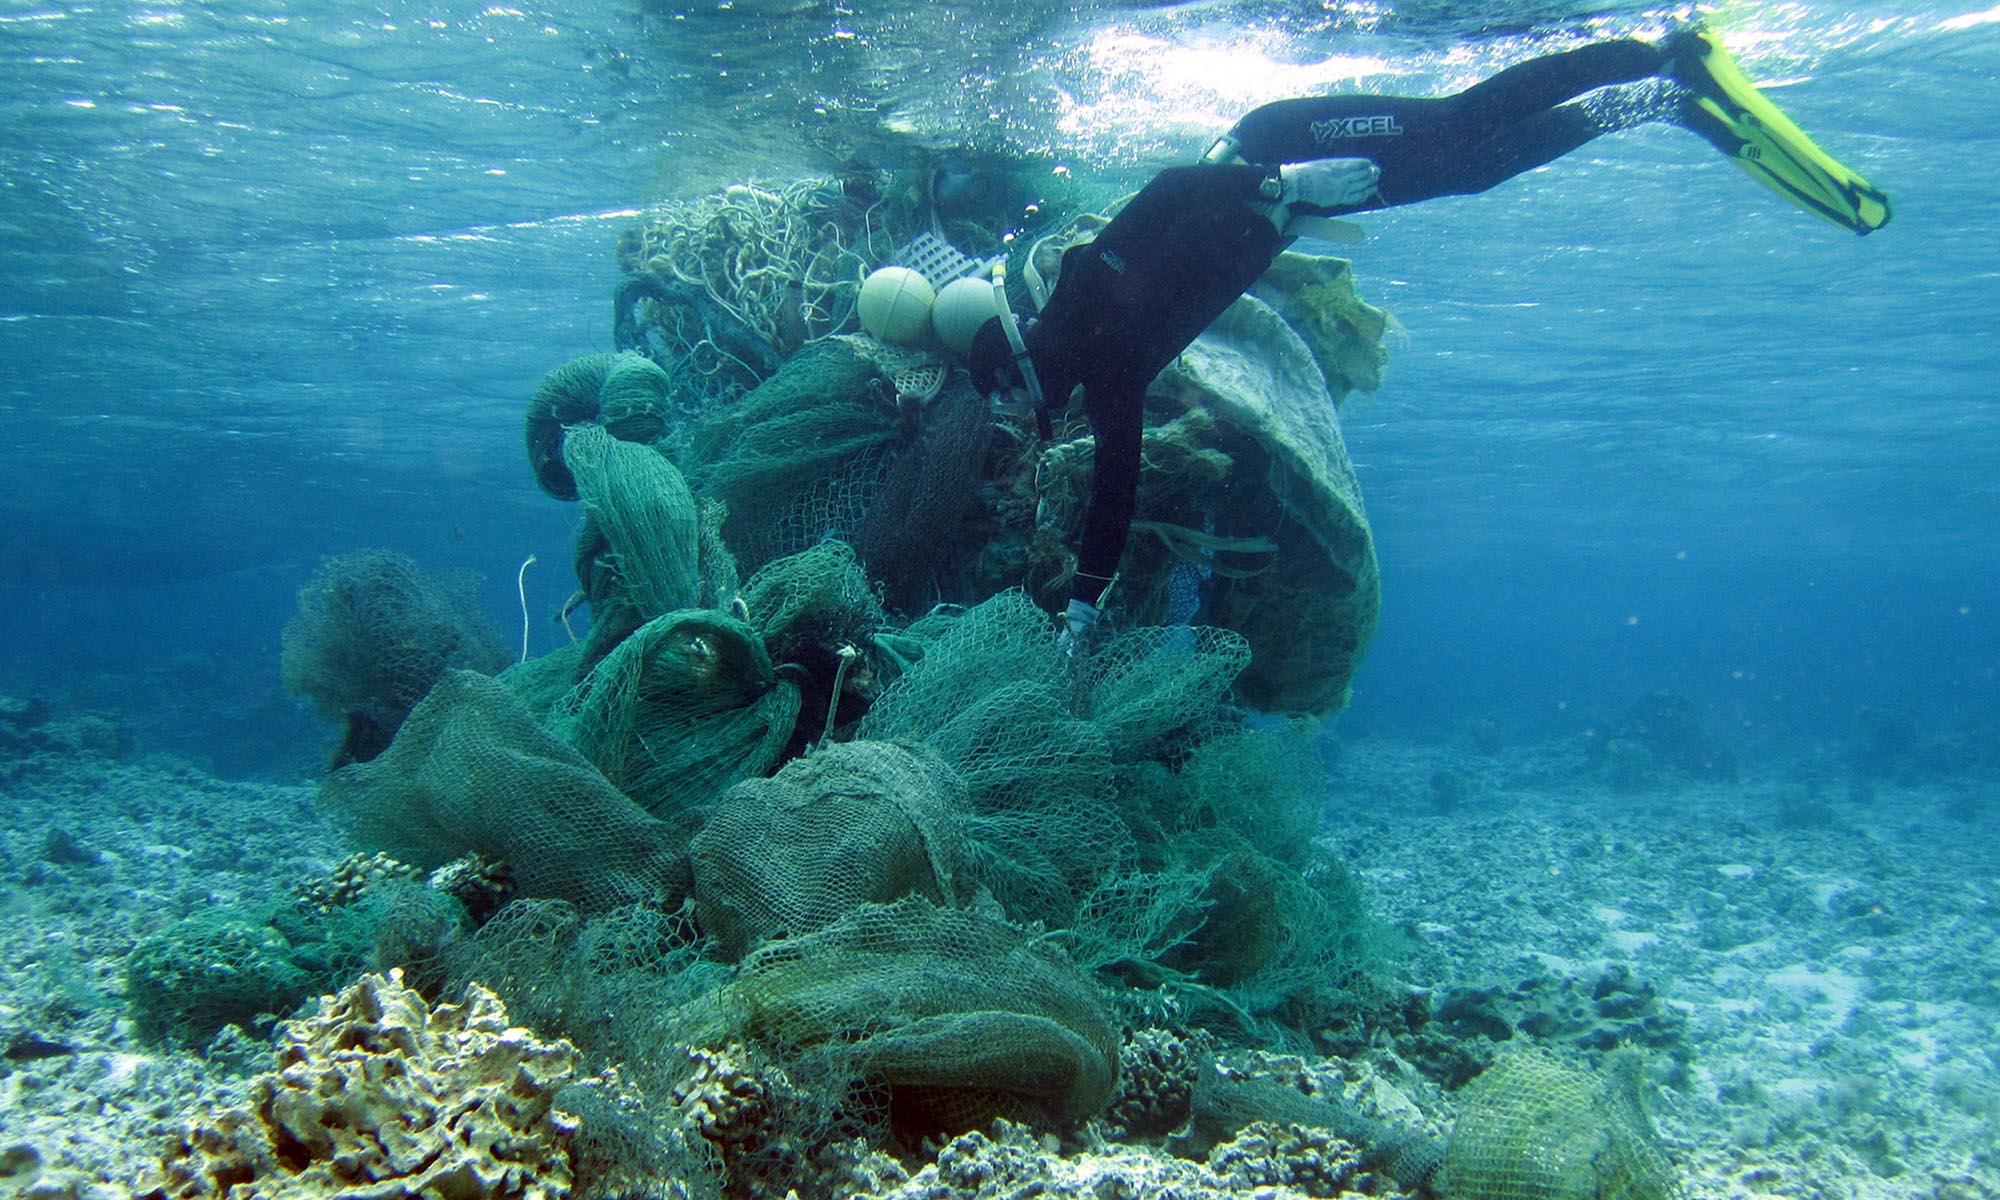 Image of a diver cleaning up derelict fishing debris underwater.